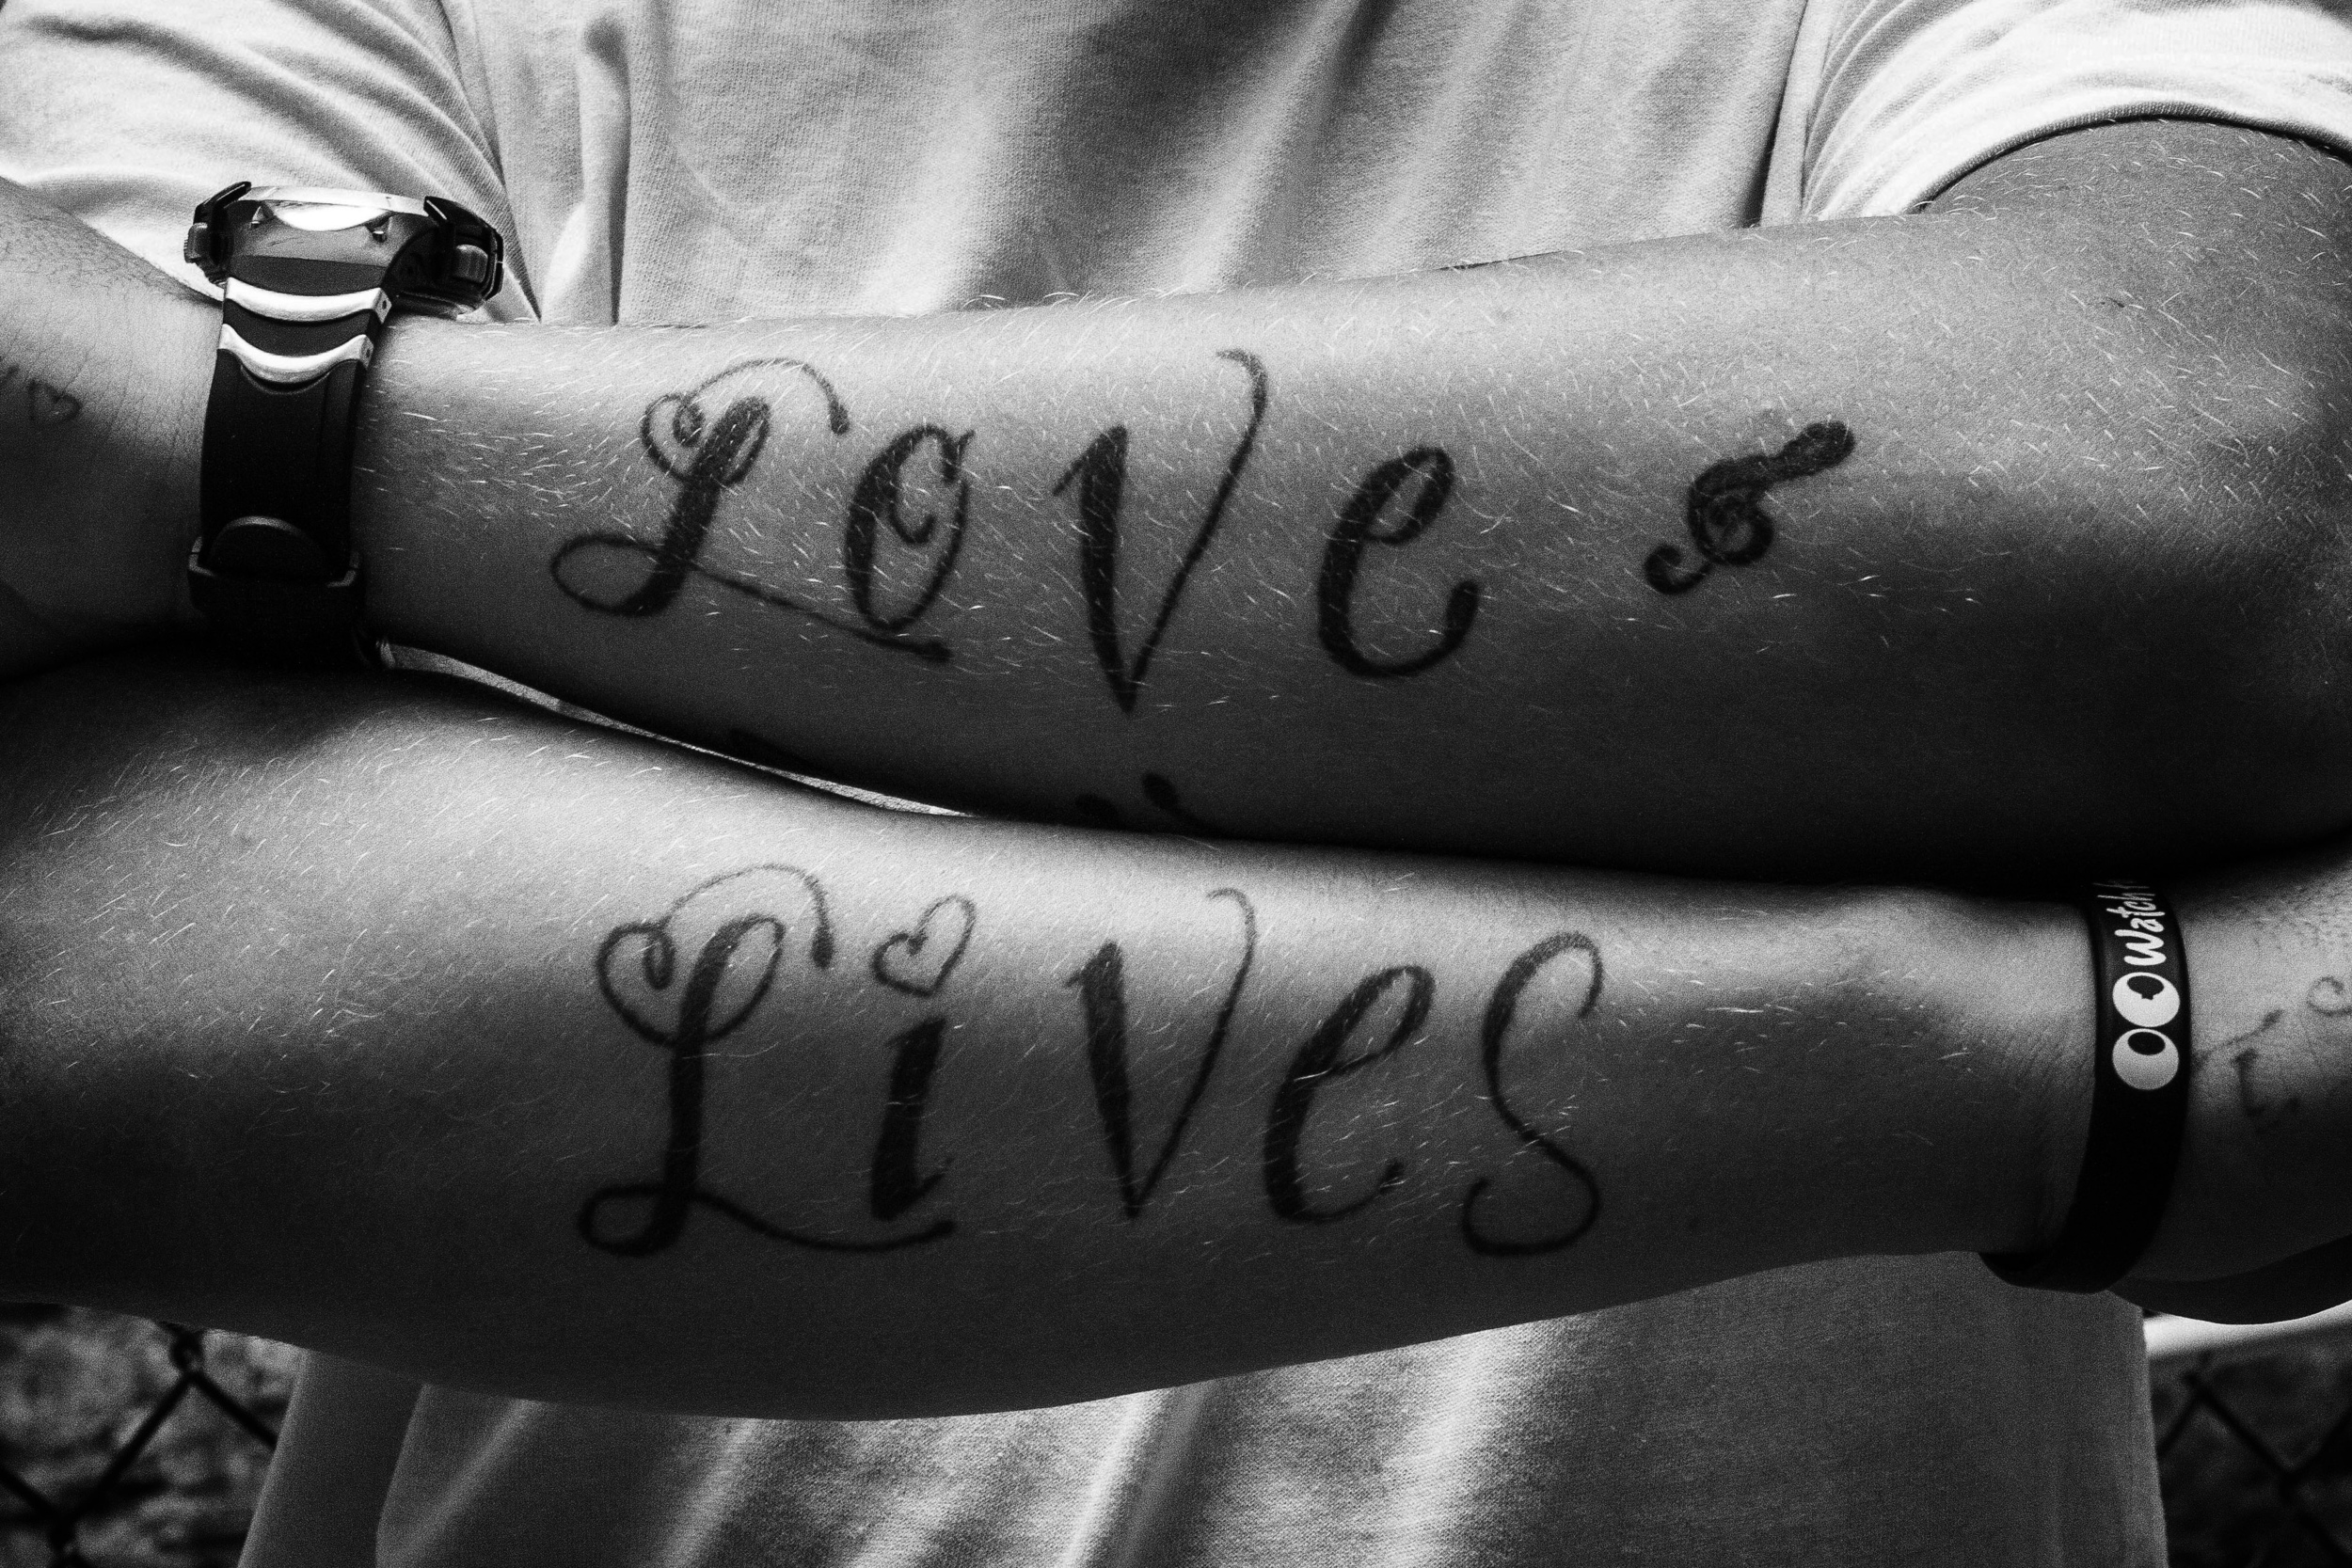 LOVE LIVES. LOVE LIVES Tattoo on Tim. Hunts Point, the Bronx, NYC. August 2012.